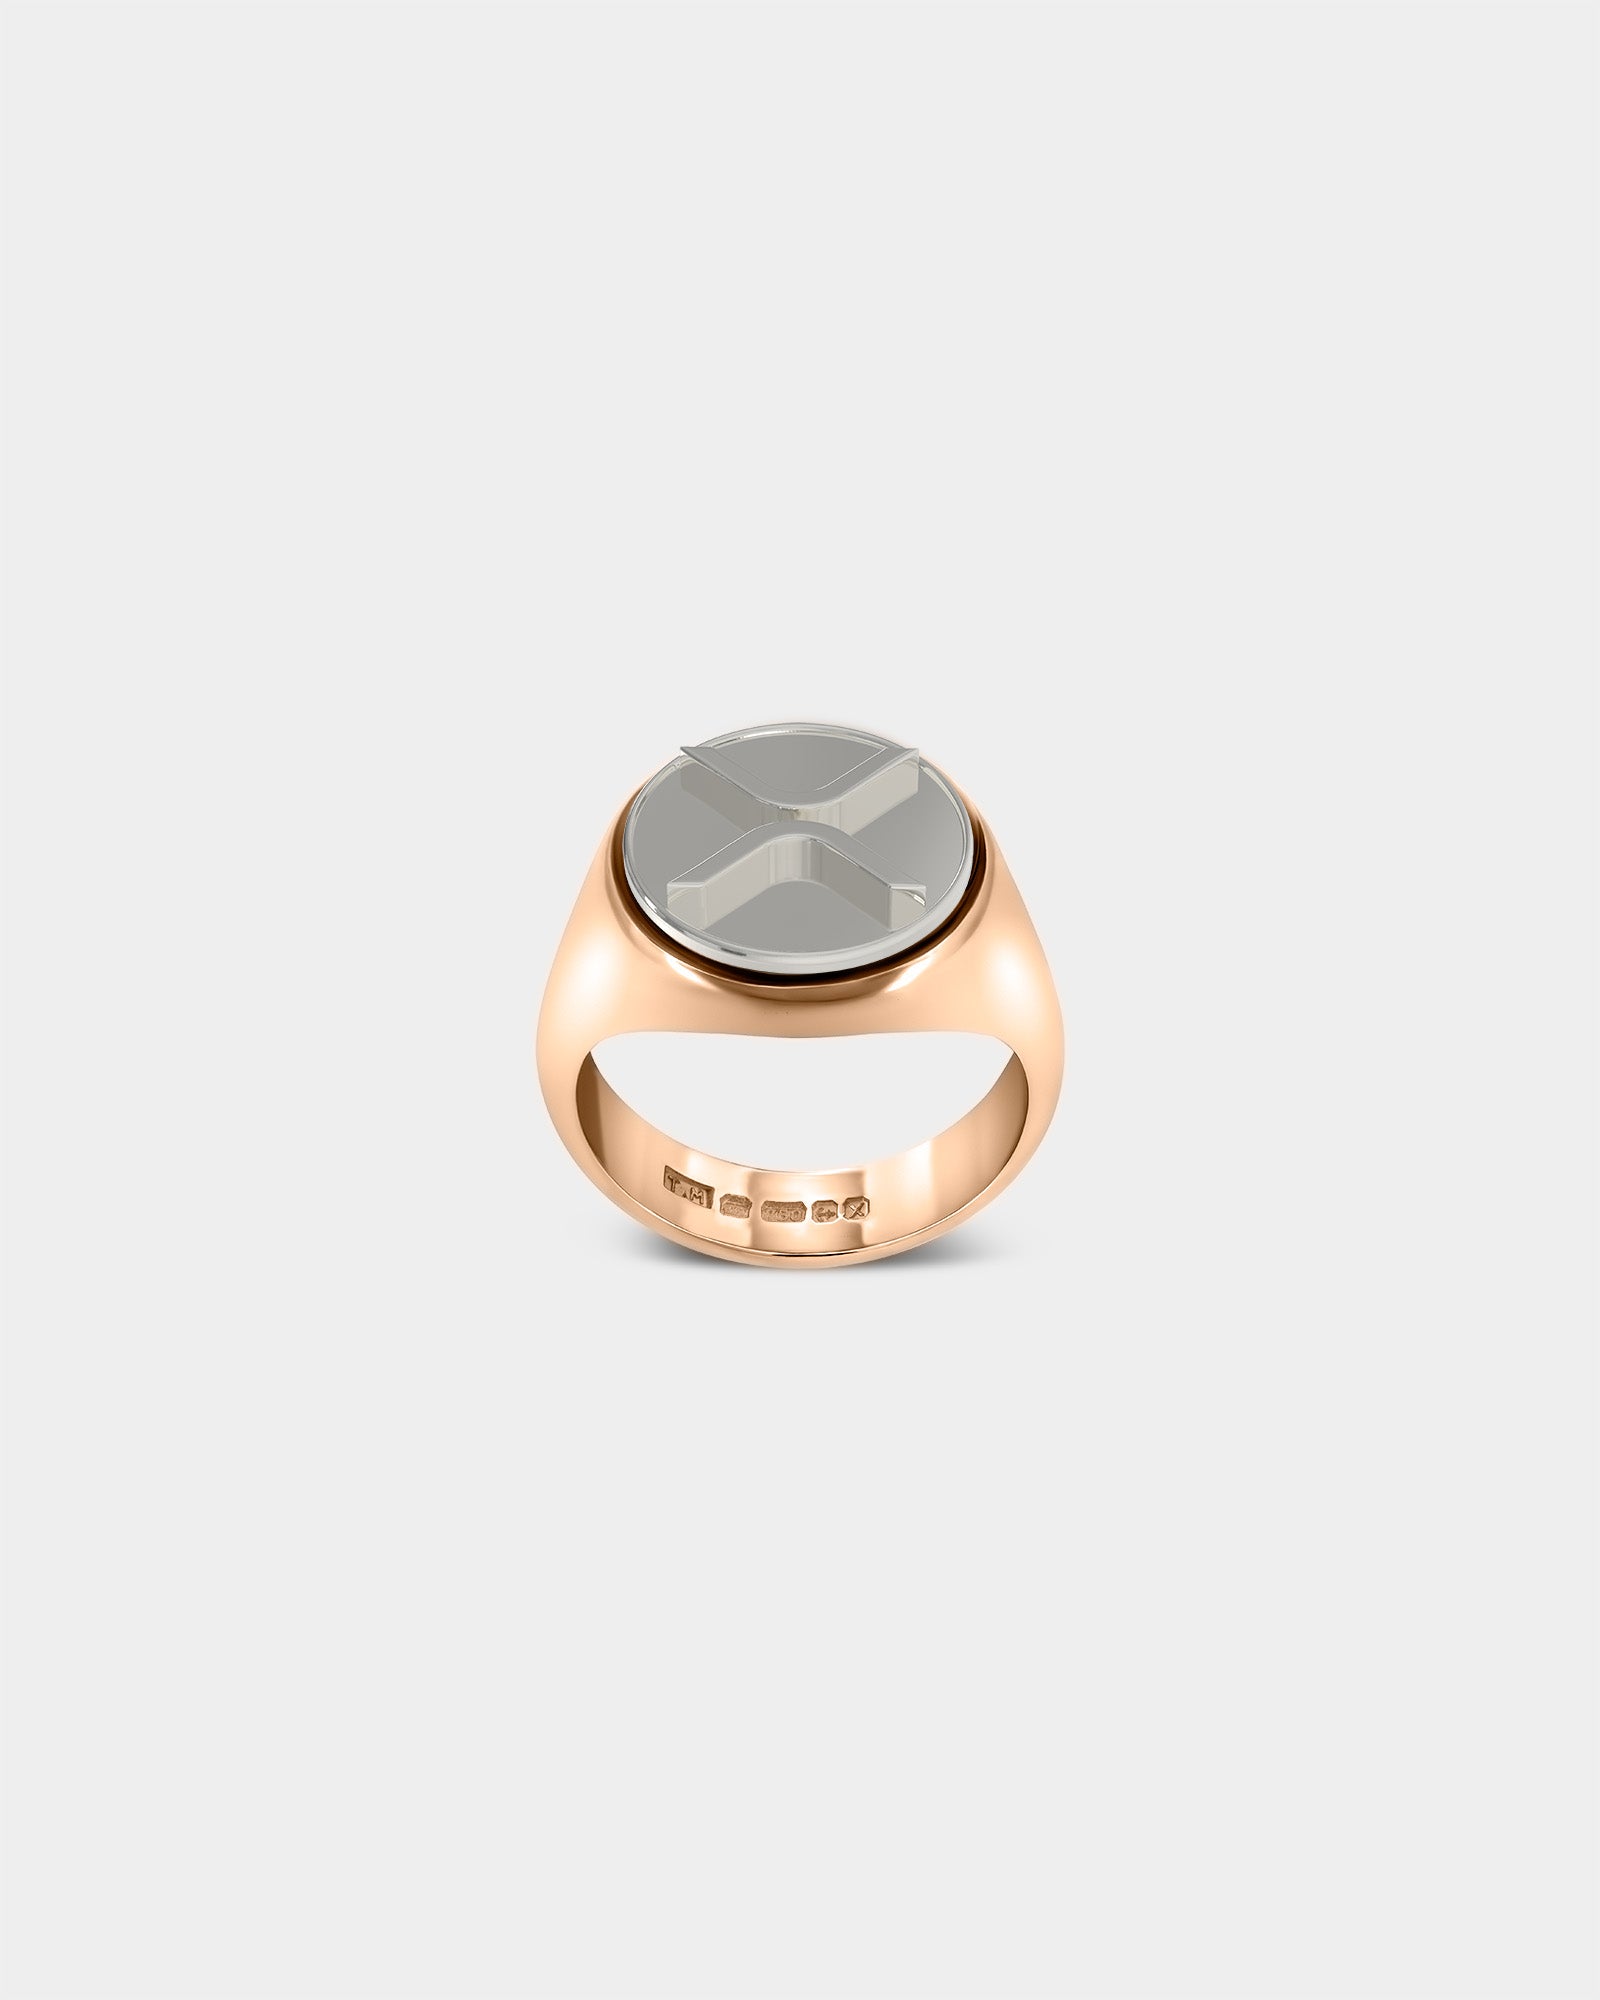 Large Ripple XRP Crypto Ring in 9k Rose Gold / Sterling Silver by Wilson Grant